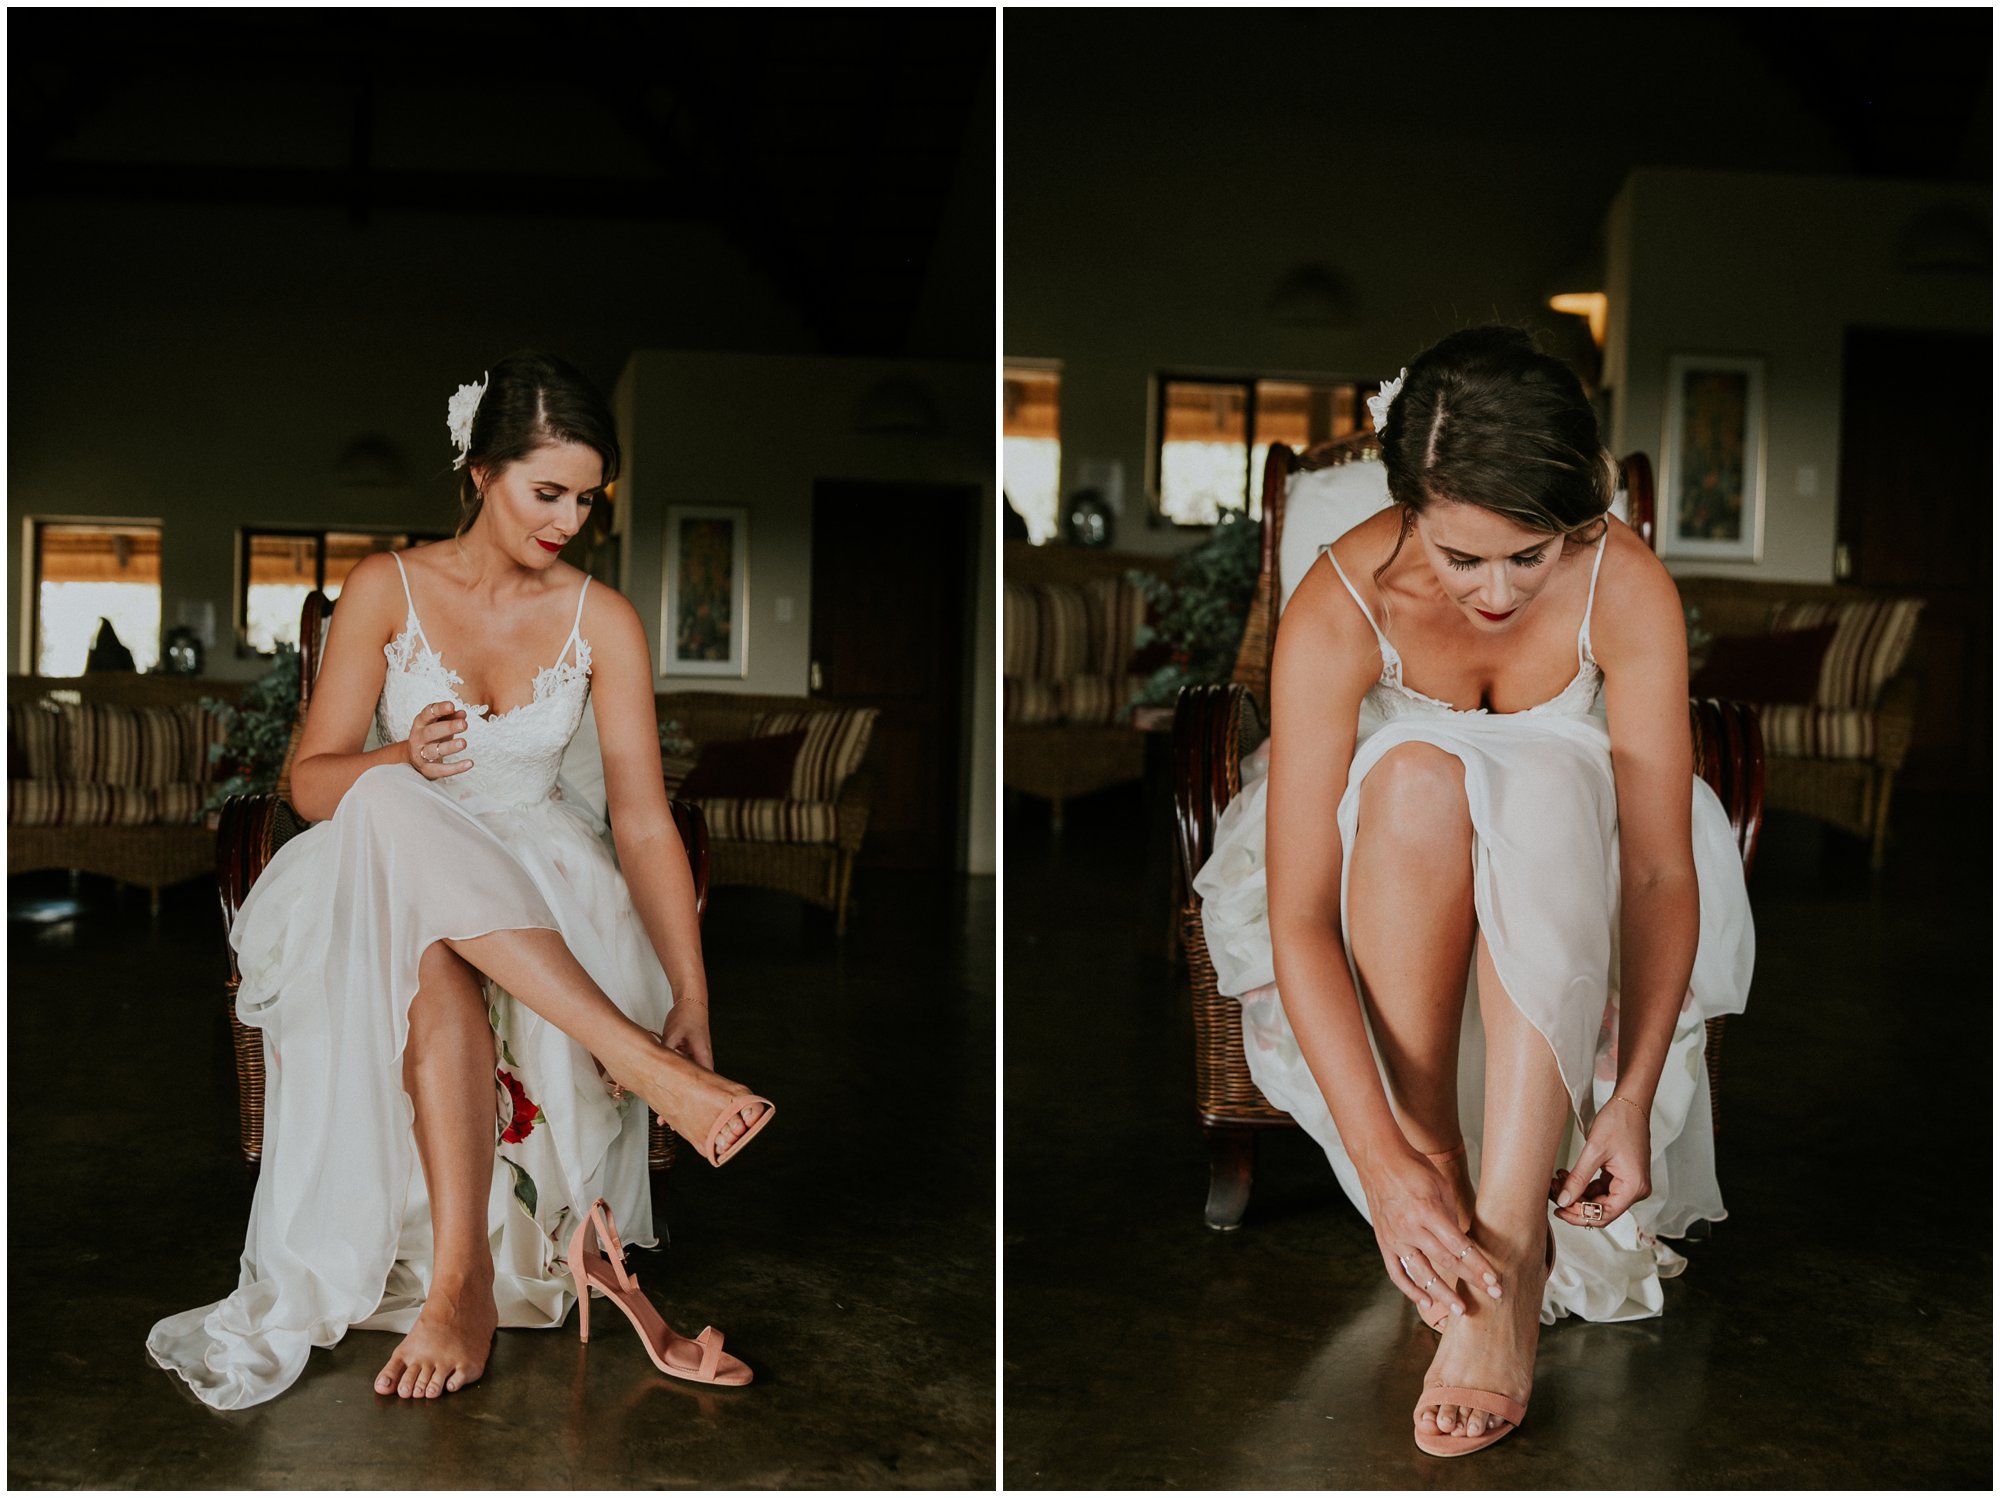 Bride Bridal Portraits at an Outdoor Bohemian Destination Wedding at Francine’s Venue in Hoedspruit Limpopo by Junebug World's Best Photographer Maryke Albertyn Award Winning International Alternative Moody Photography based in Cape Town South Africa